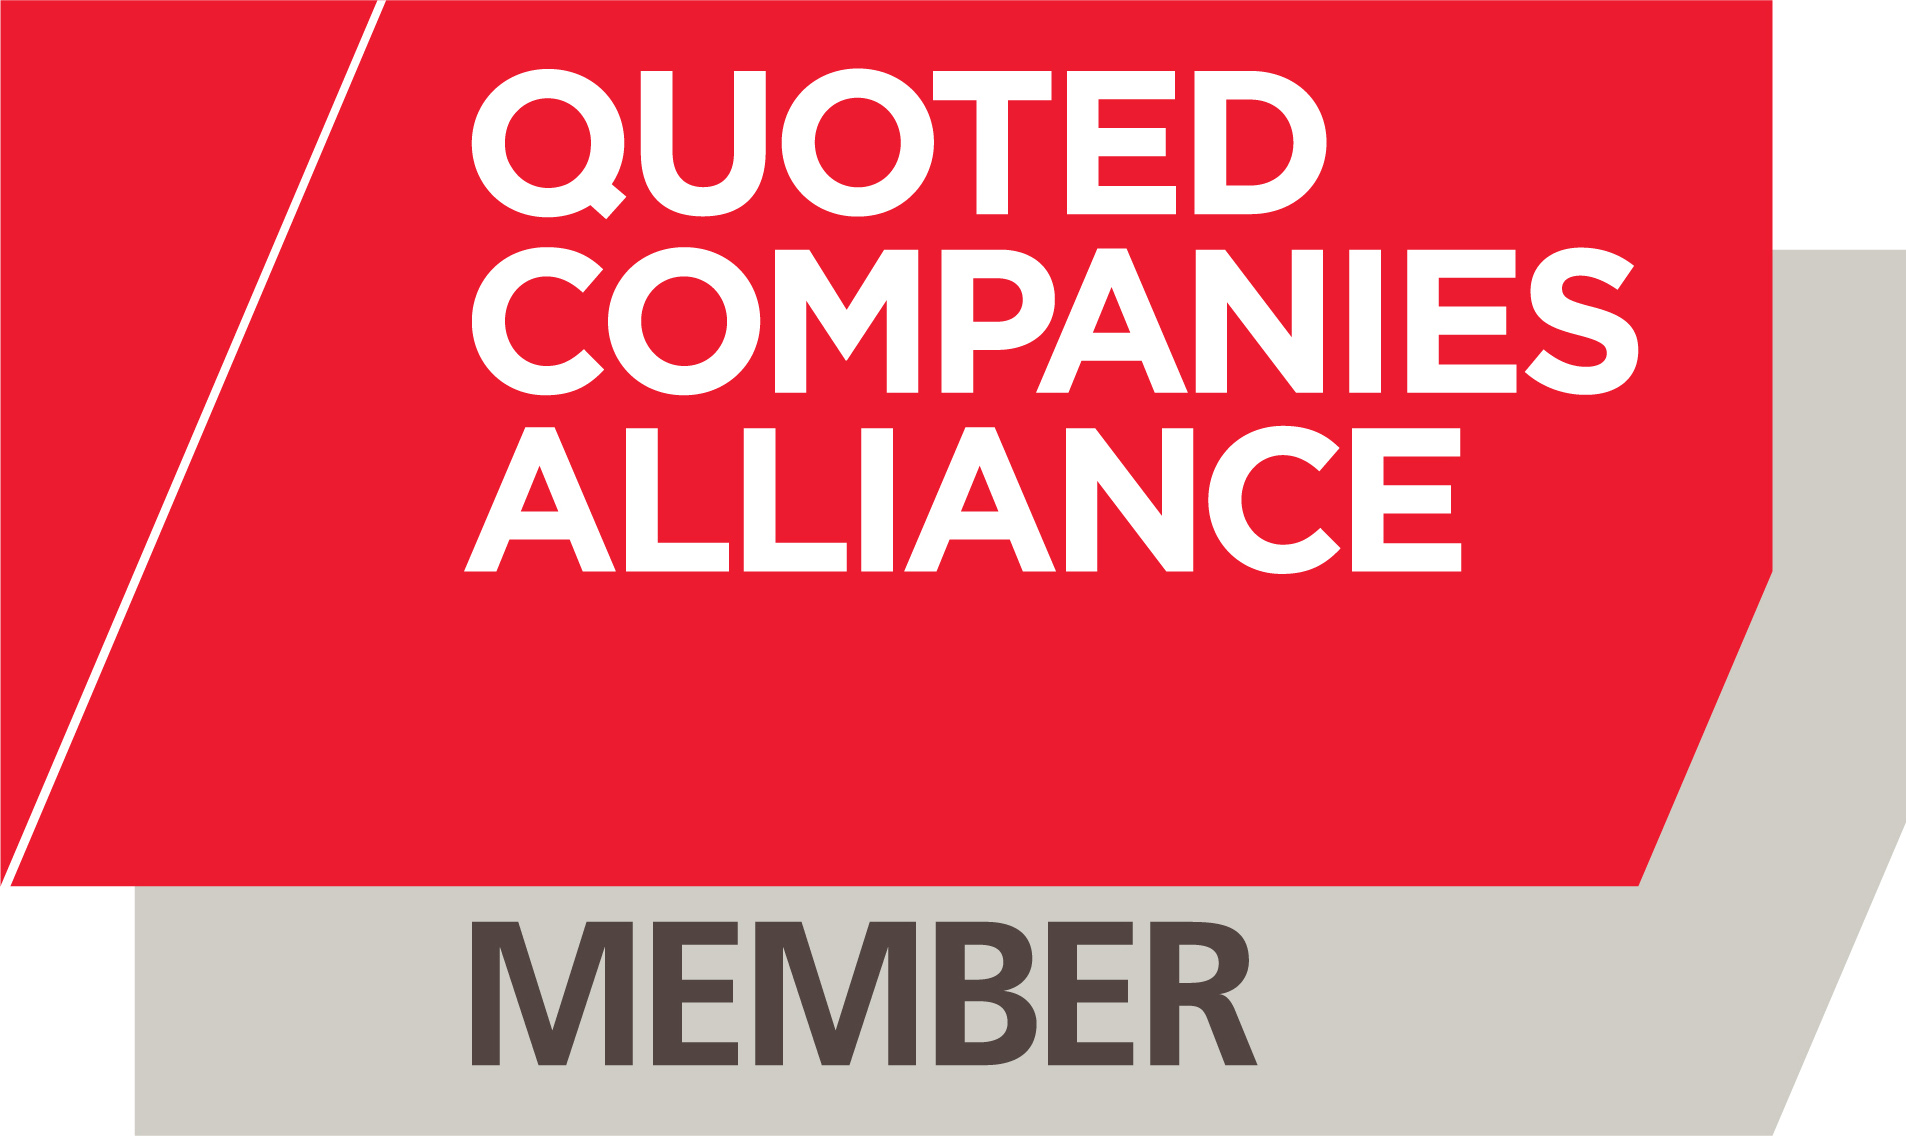 Quoted Companies Alliance Member Logo